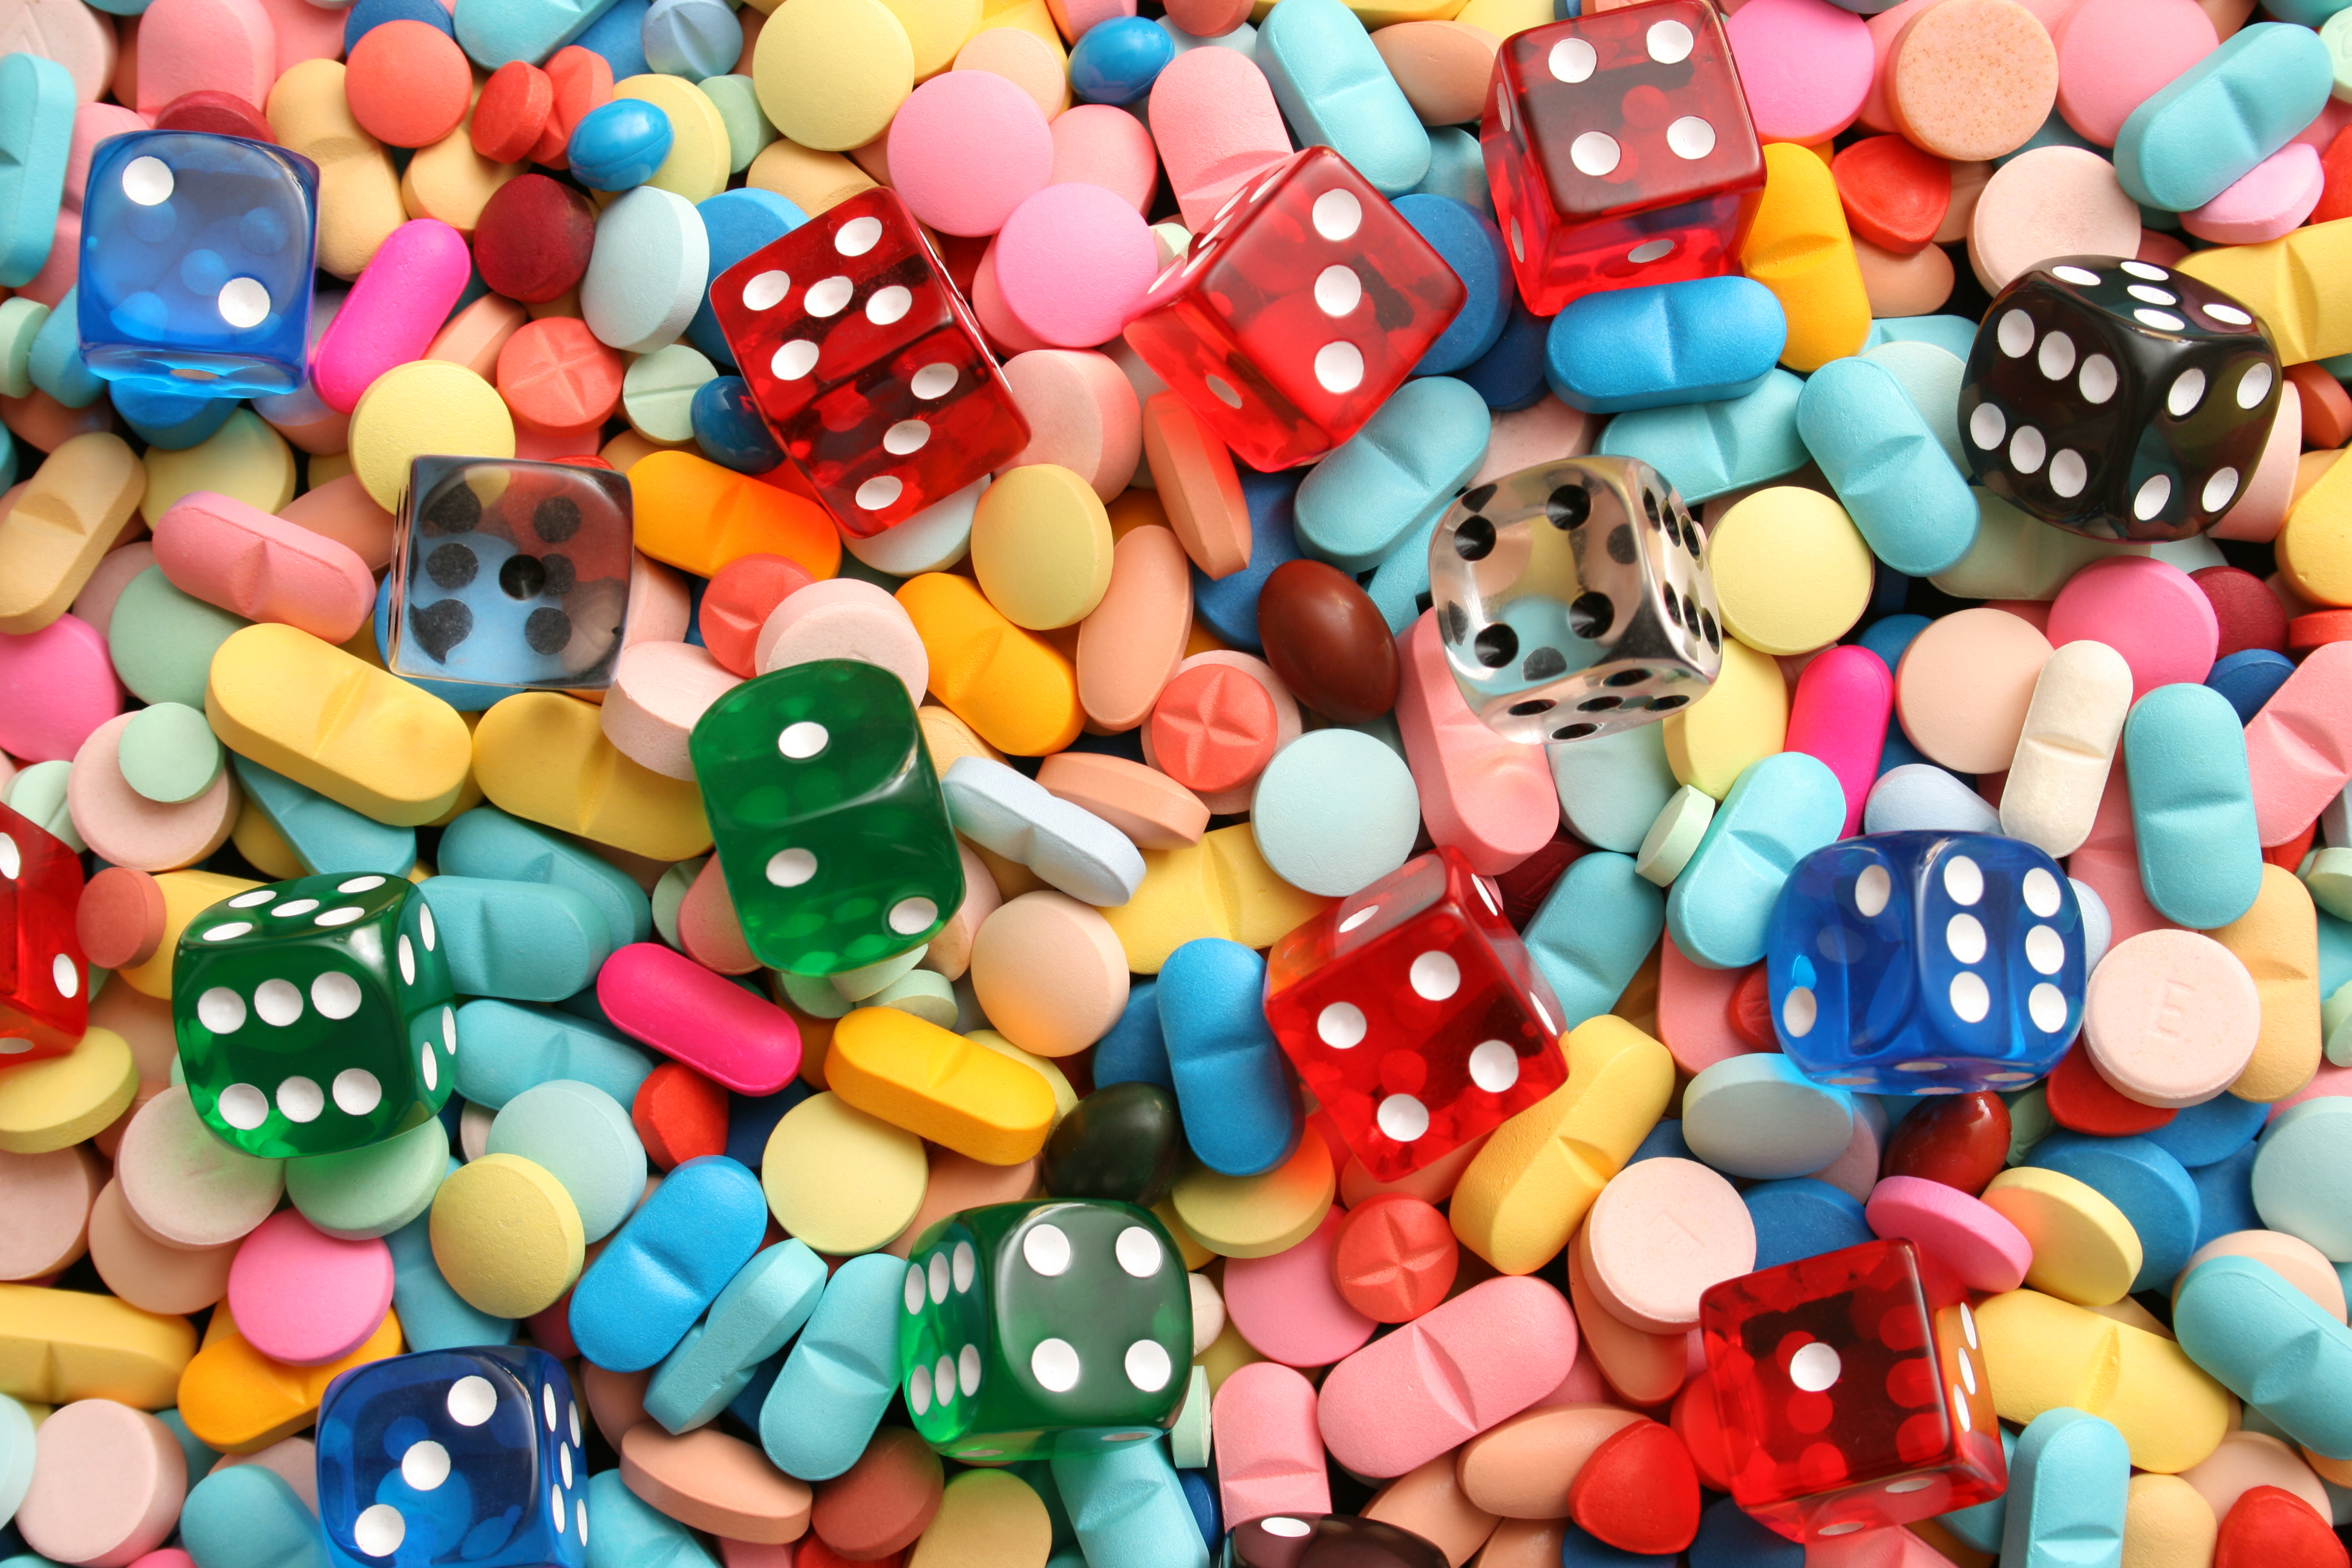 A multicolored array of pills, mixed in with dice to illustrate the risk of untested dietary supplements.